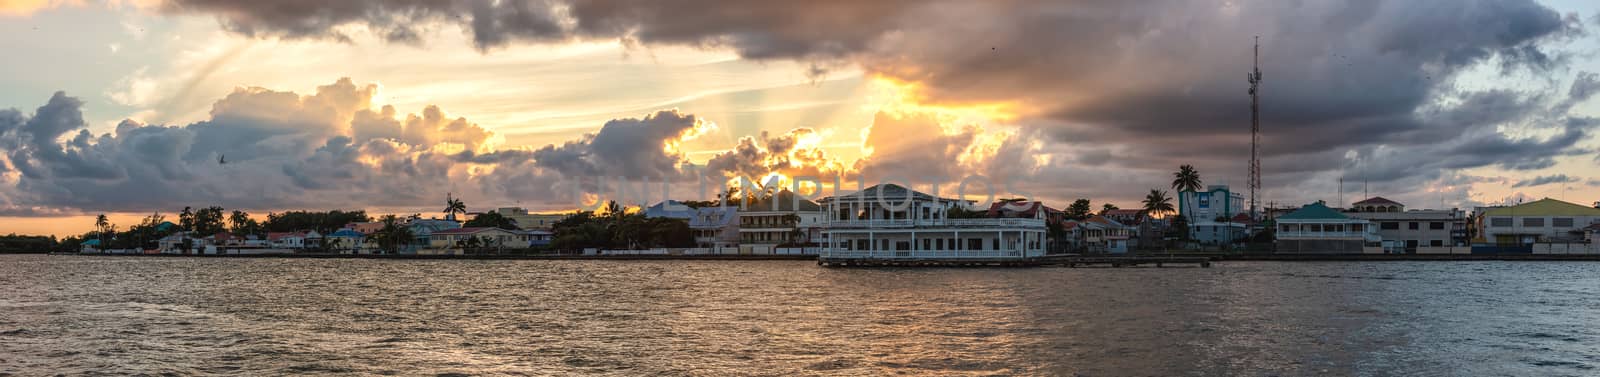 Beautiful panoramic shot of Belize city at sunset. Amazing orange sky and clouds in the background.